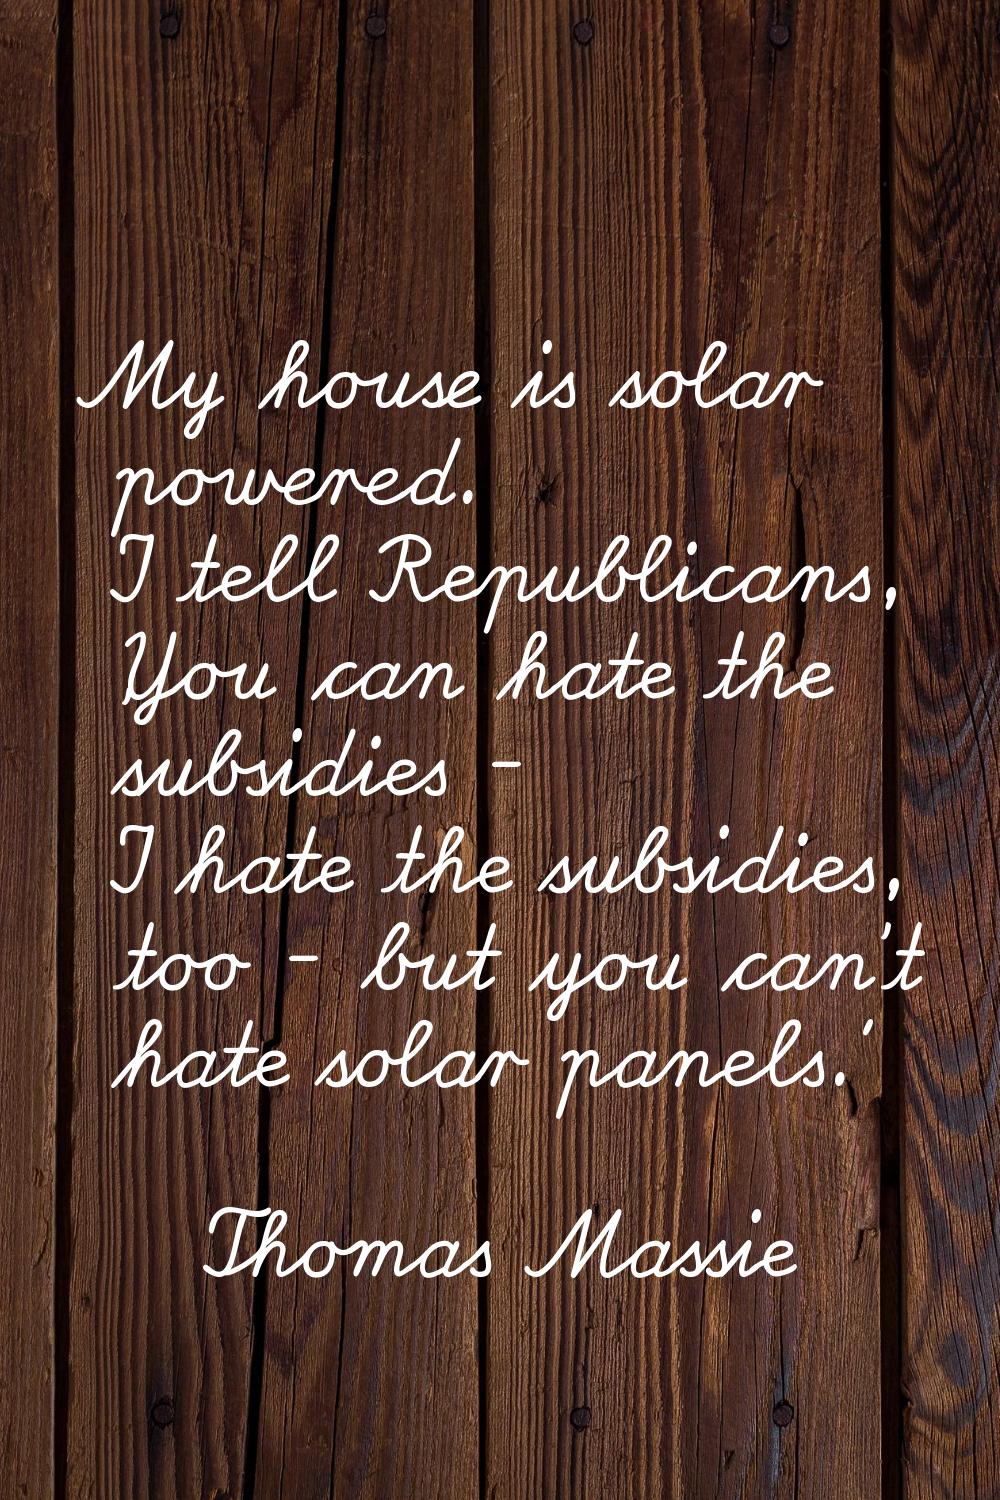 My house is solar powered. I tell Republicans, 'You can hate the subsidies - I hate the subsidies, 